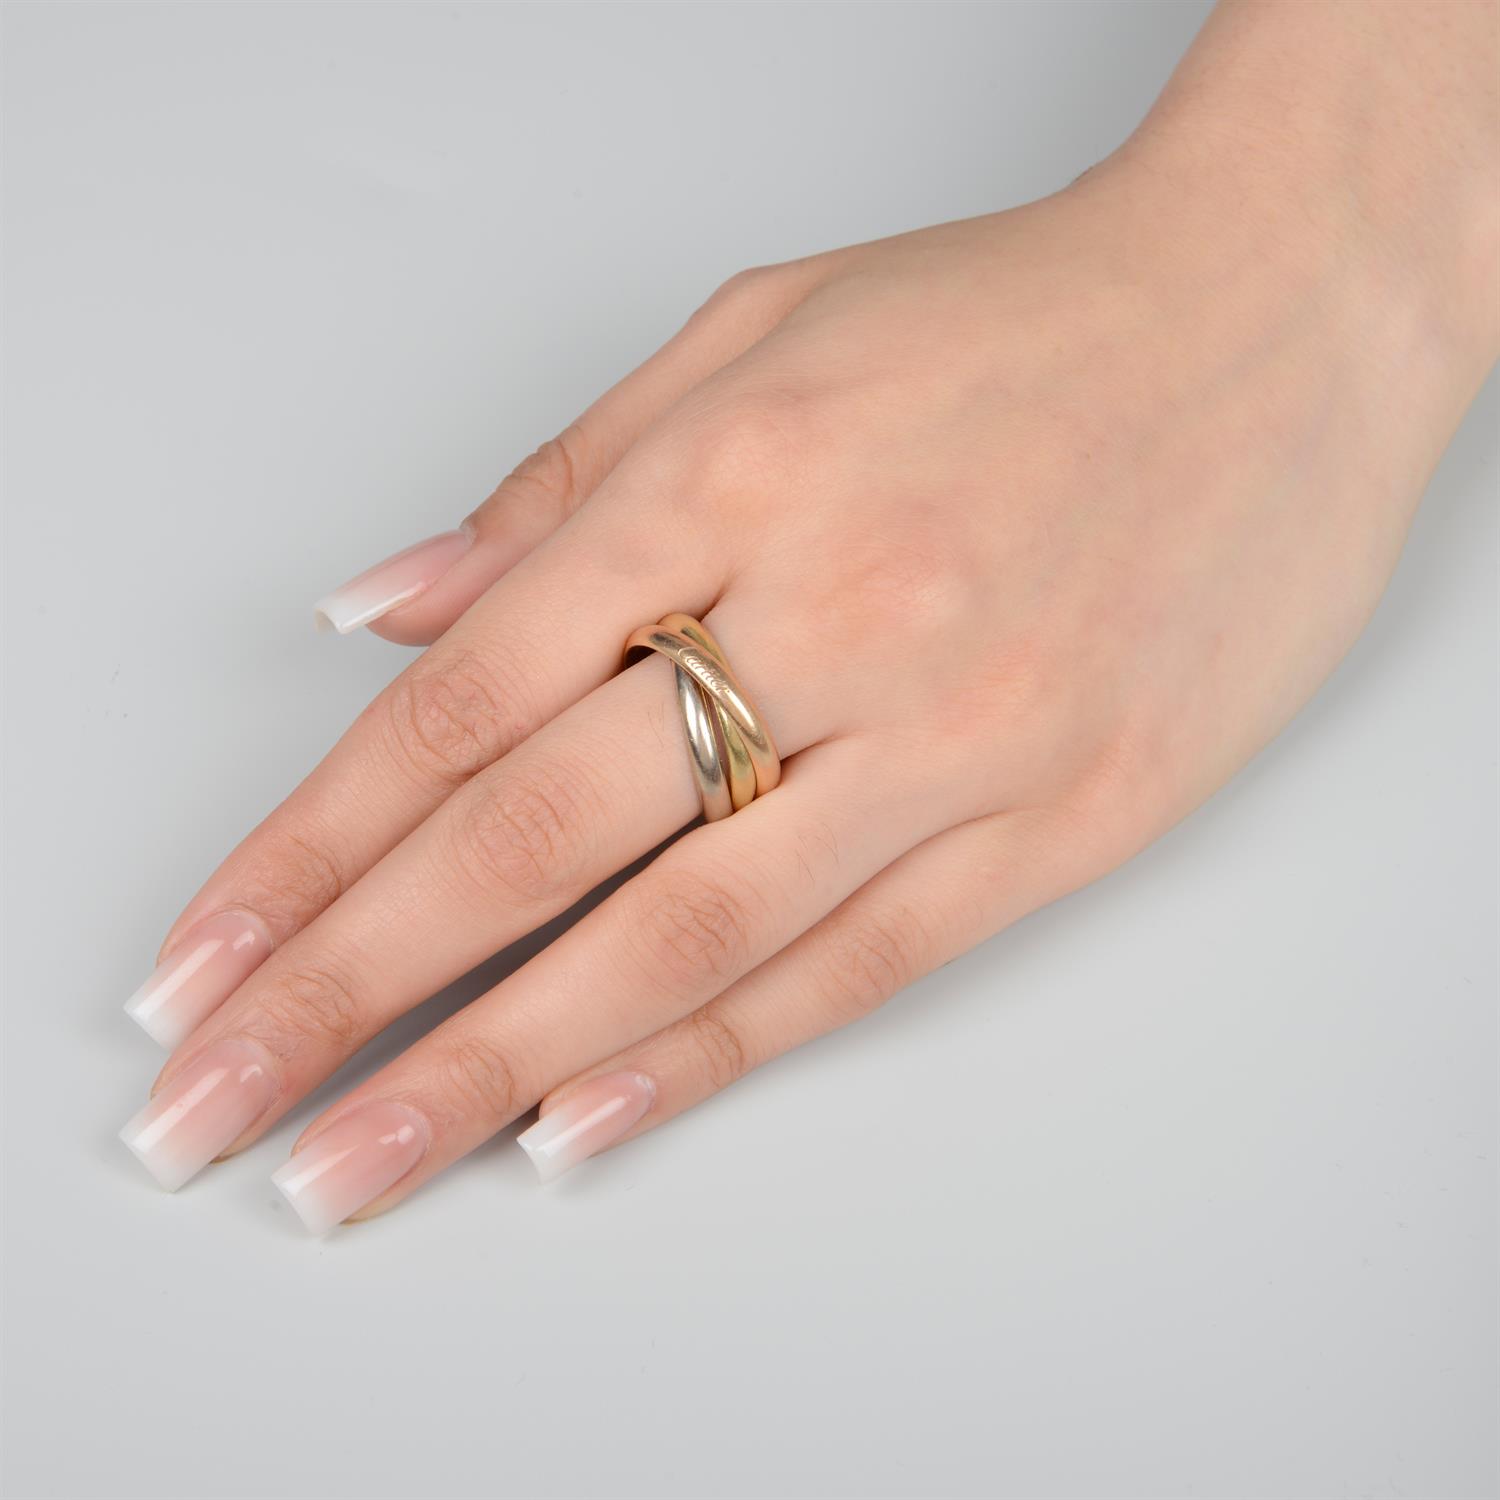 18ct gold 'Trinity' ring, by Cartier - Image 5 of 5